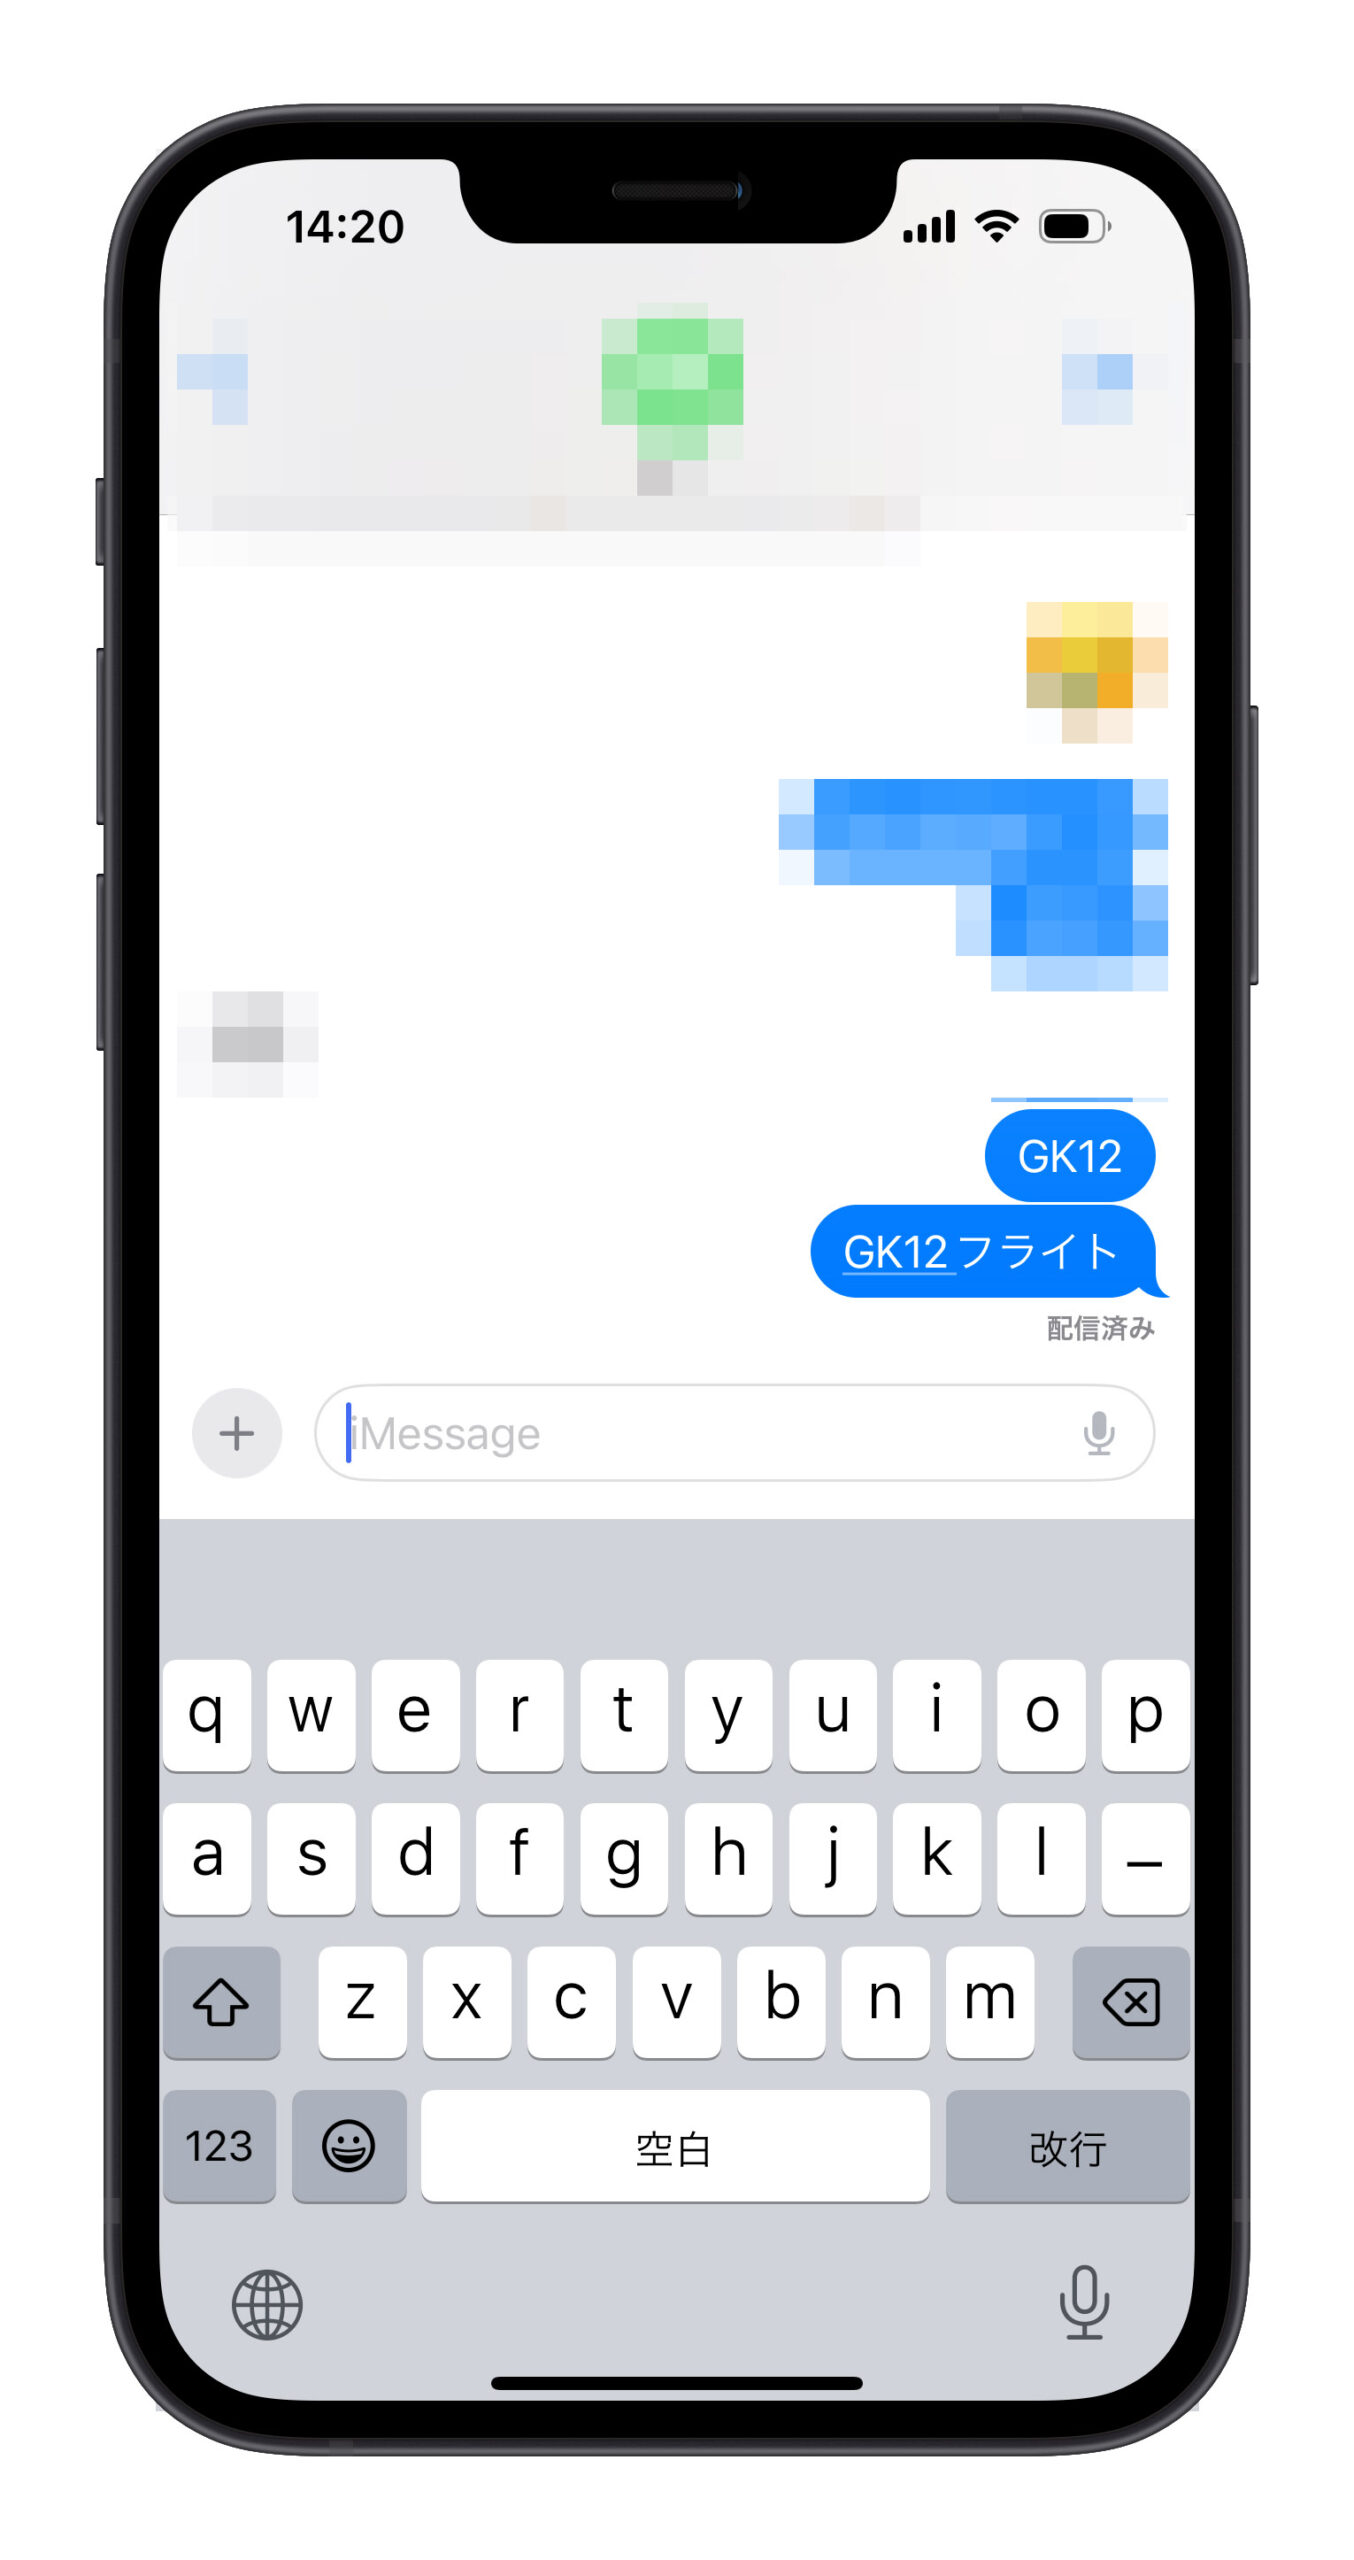 iPhone フライト情報 iMessage